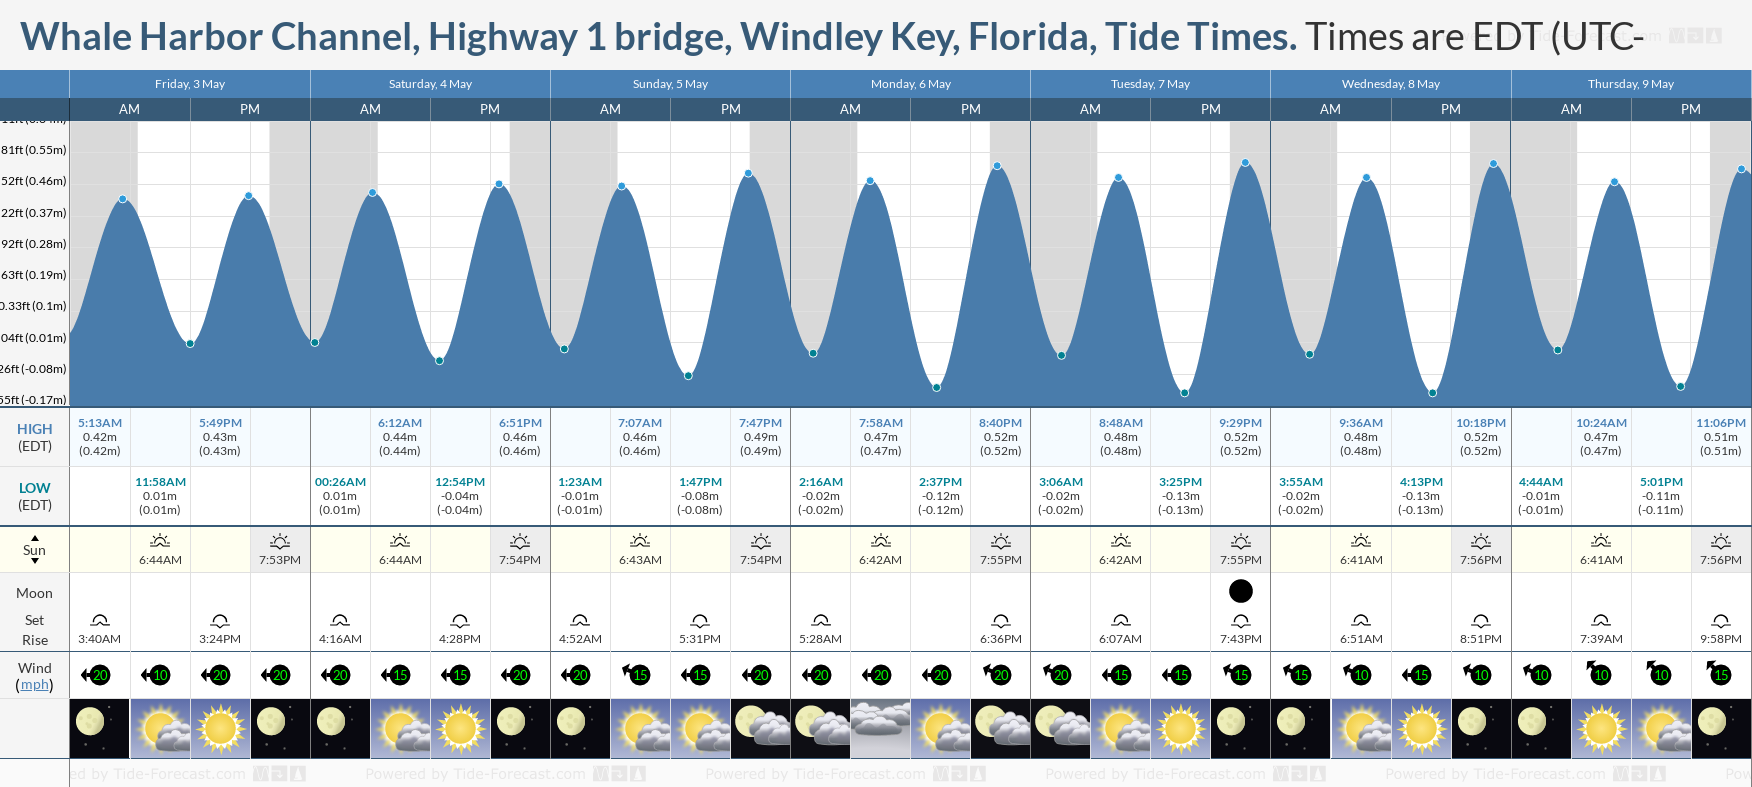 Whale Harbor Channel, Highway 1 bridge, Windley Key, Florida Tide Chart including high and low tide tide times for the next 7 days